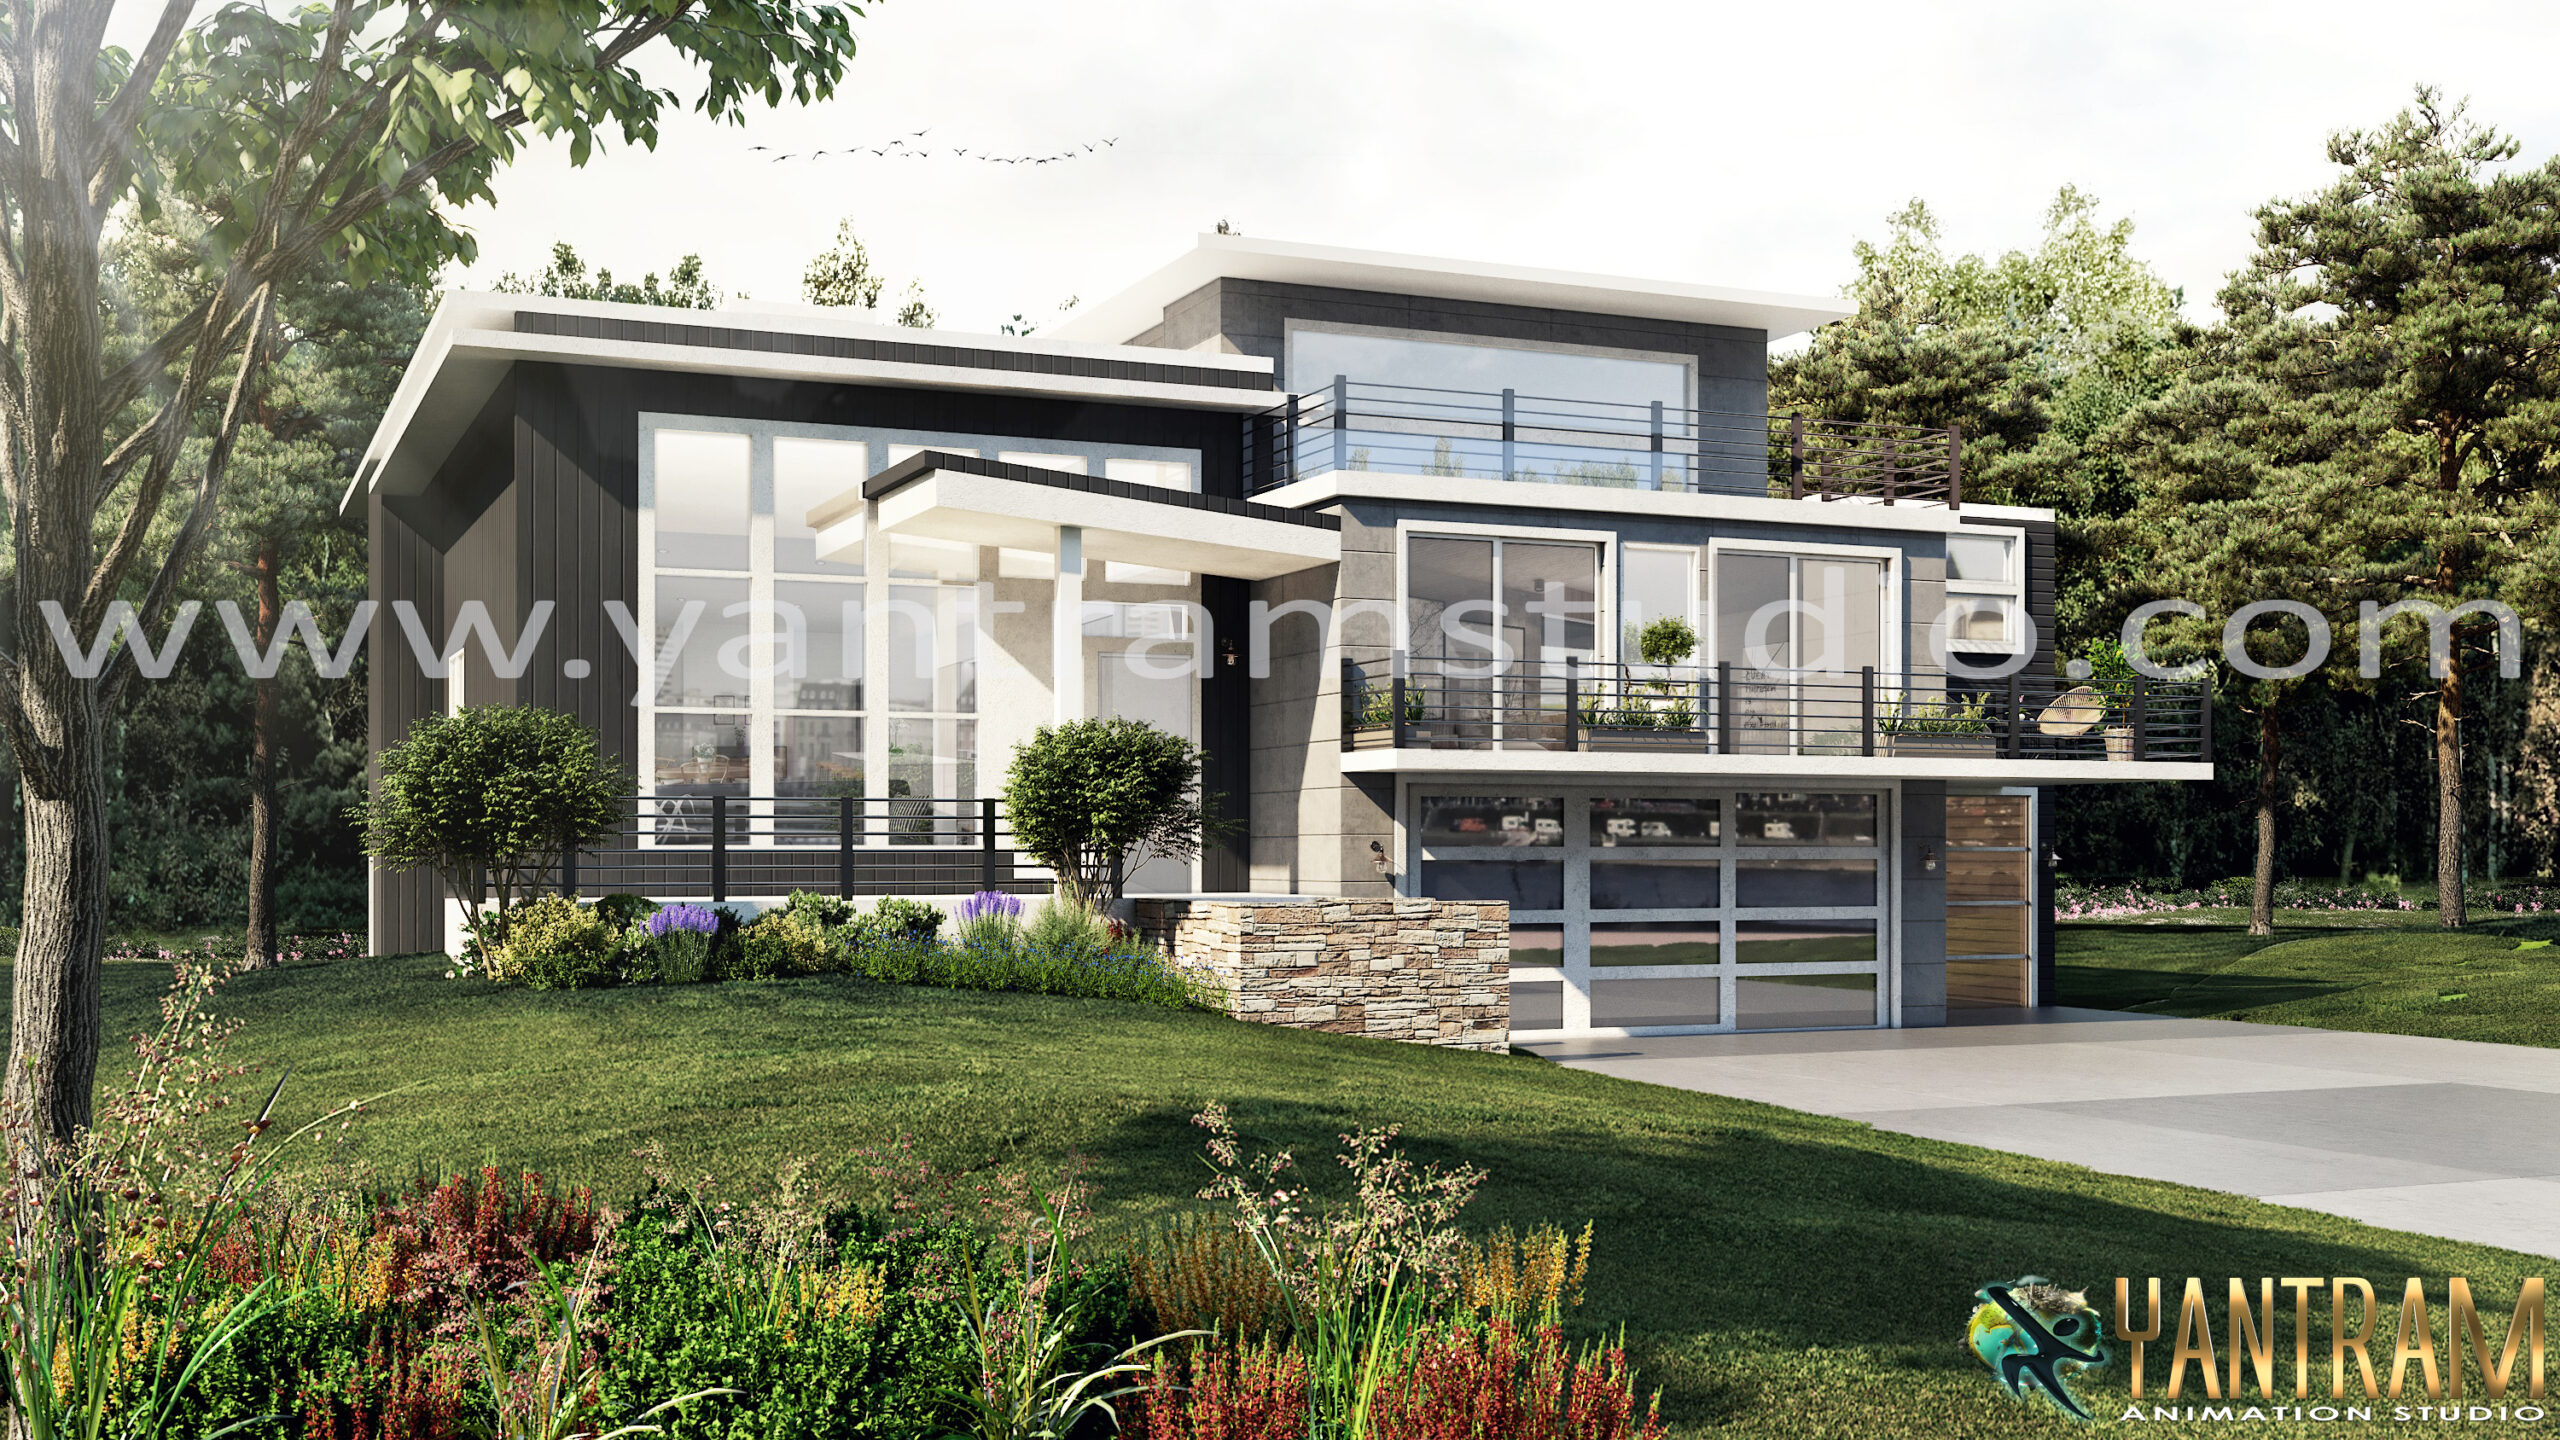 project-3d-exterior-visualization-architectural-rendering-company-Fort-Worth-Texas